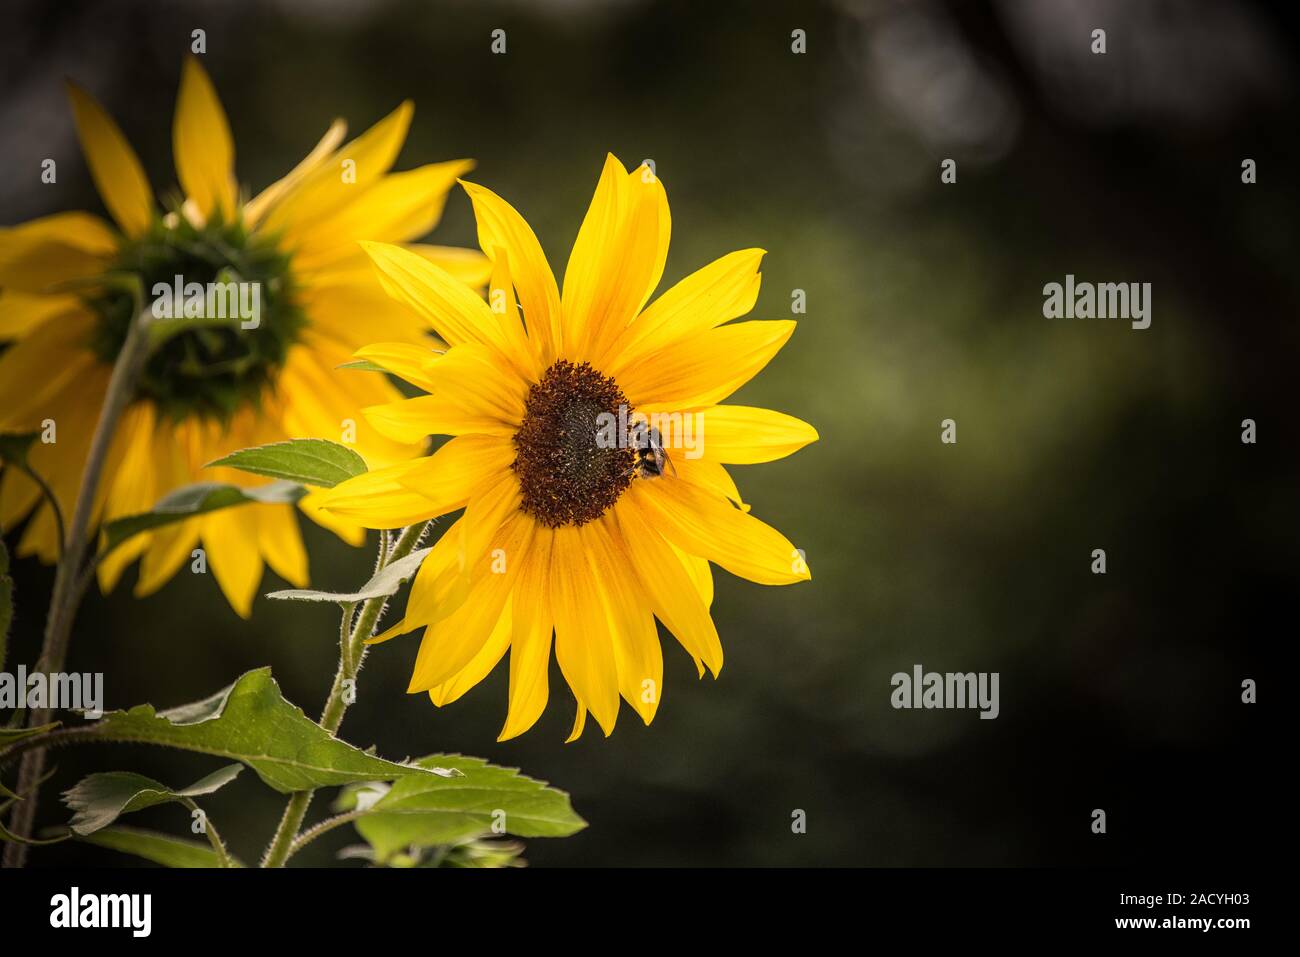 Sun Flower heads against an out of focus background taken on a sunny day Stock Photo